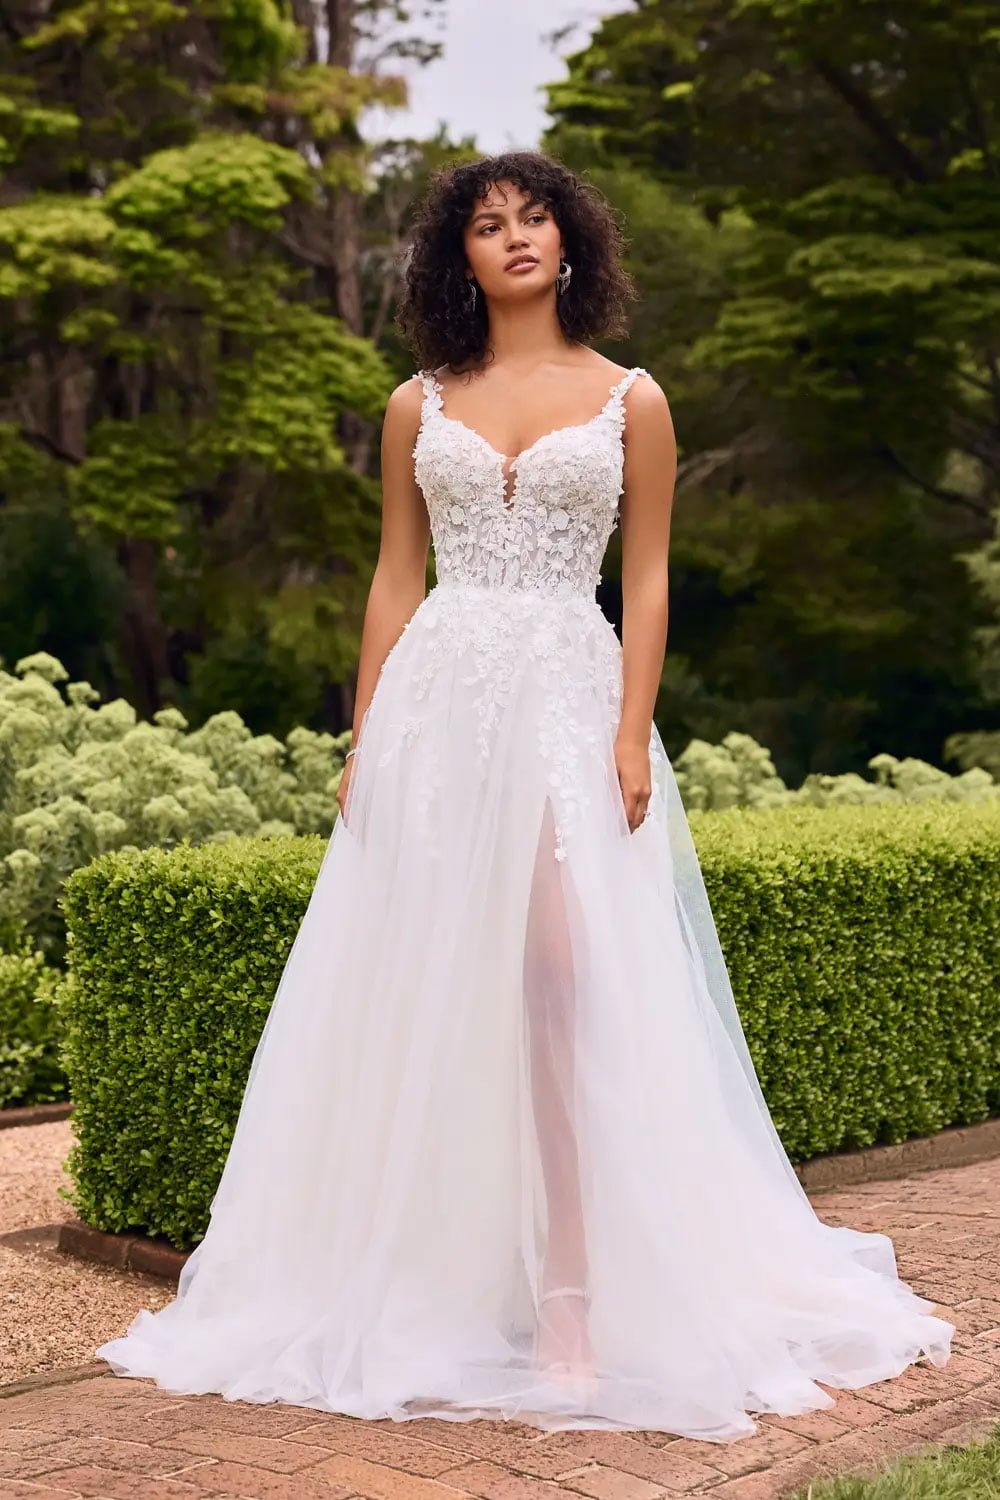 Daphne is a floral tulle A-Line dress with a sweetheart neckline and delicate lace straps. She has a glitter tulle skirt, optional hidden leg slit and is perfect for the bride wanting a romantic boho look.